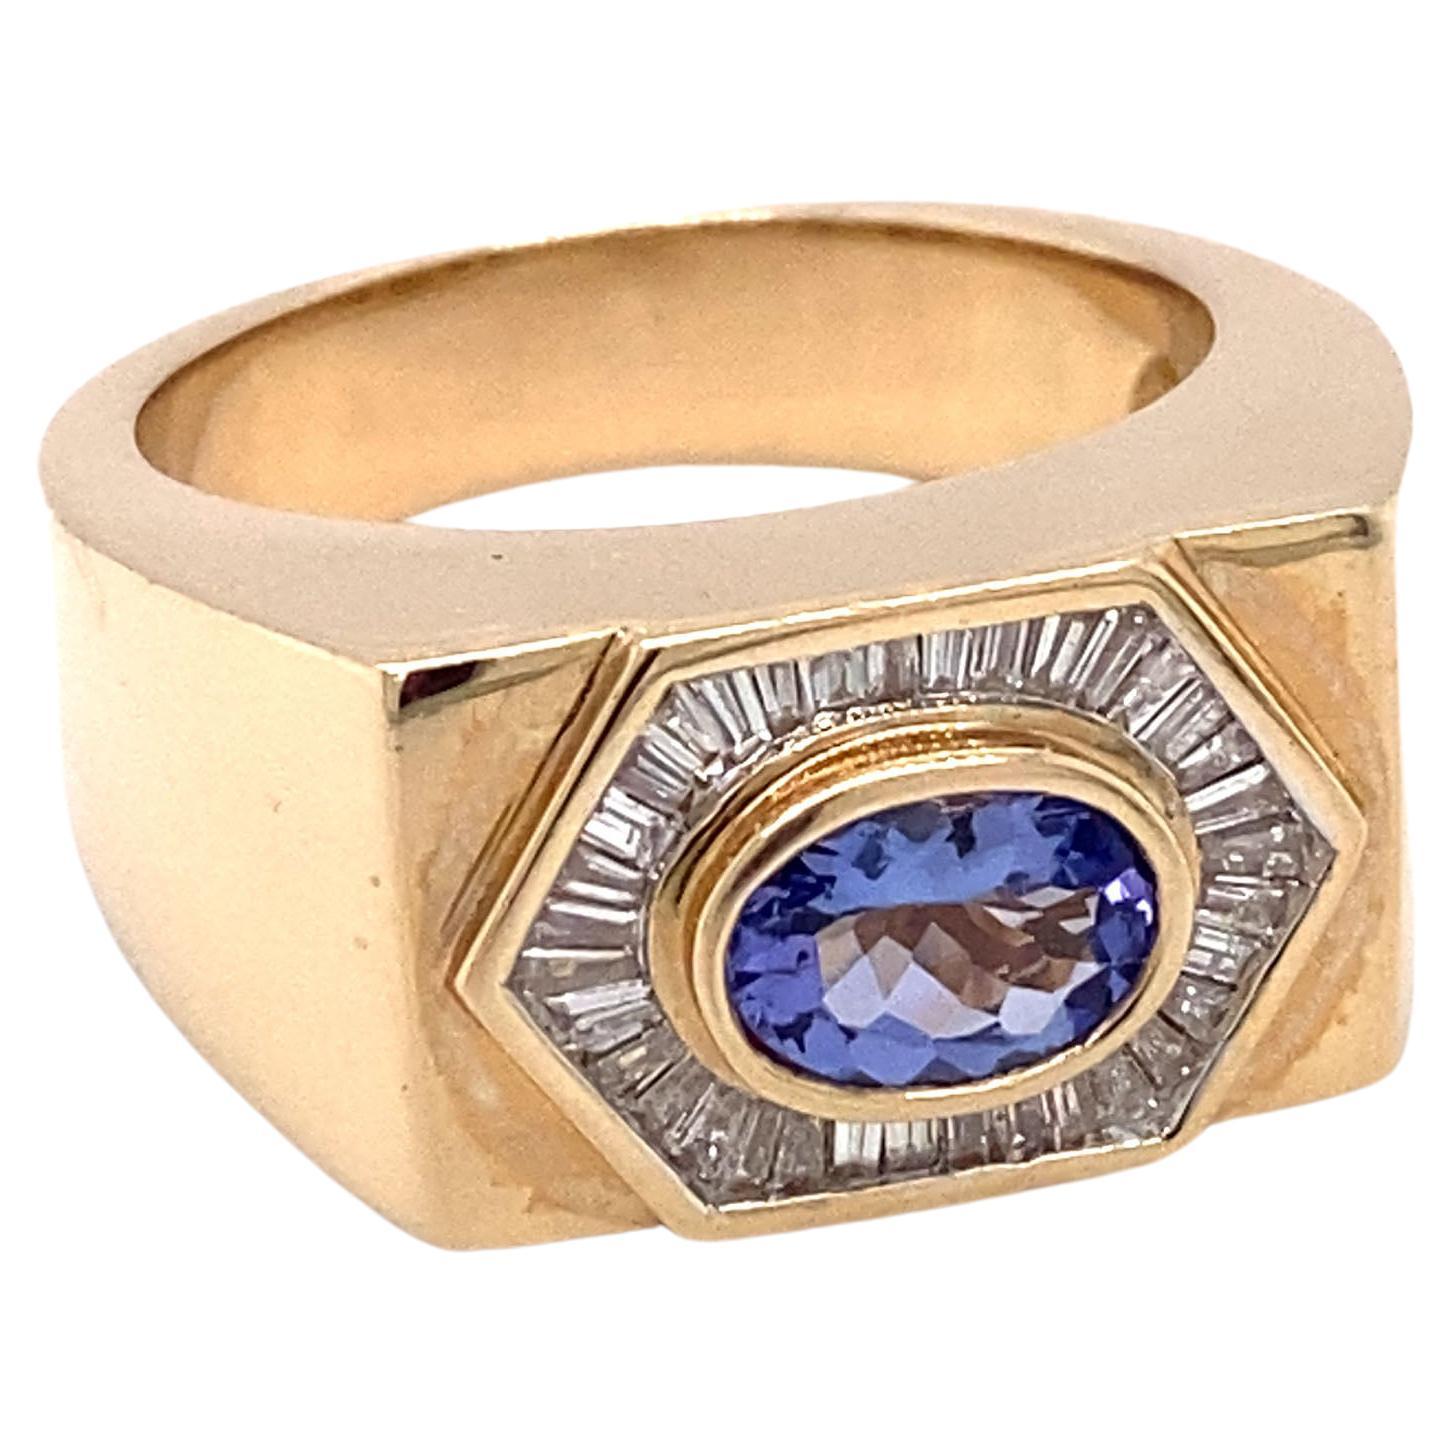 Circa 1980s 1.12 Carat Oval Sapphire and Diamond Ring in 14K Gold For Sale